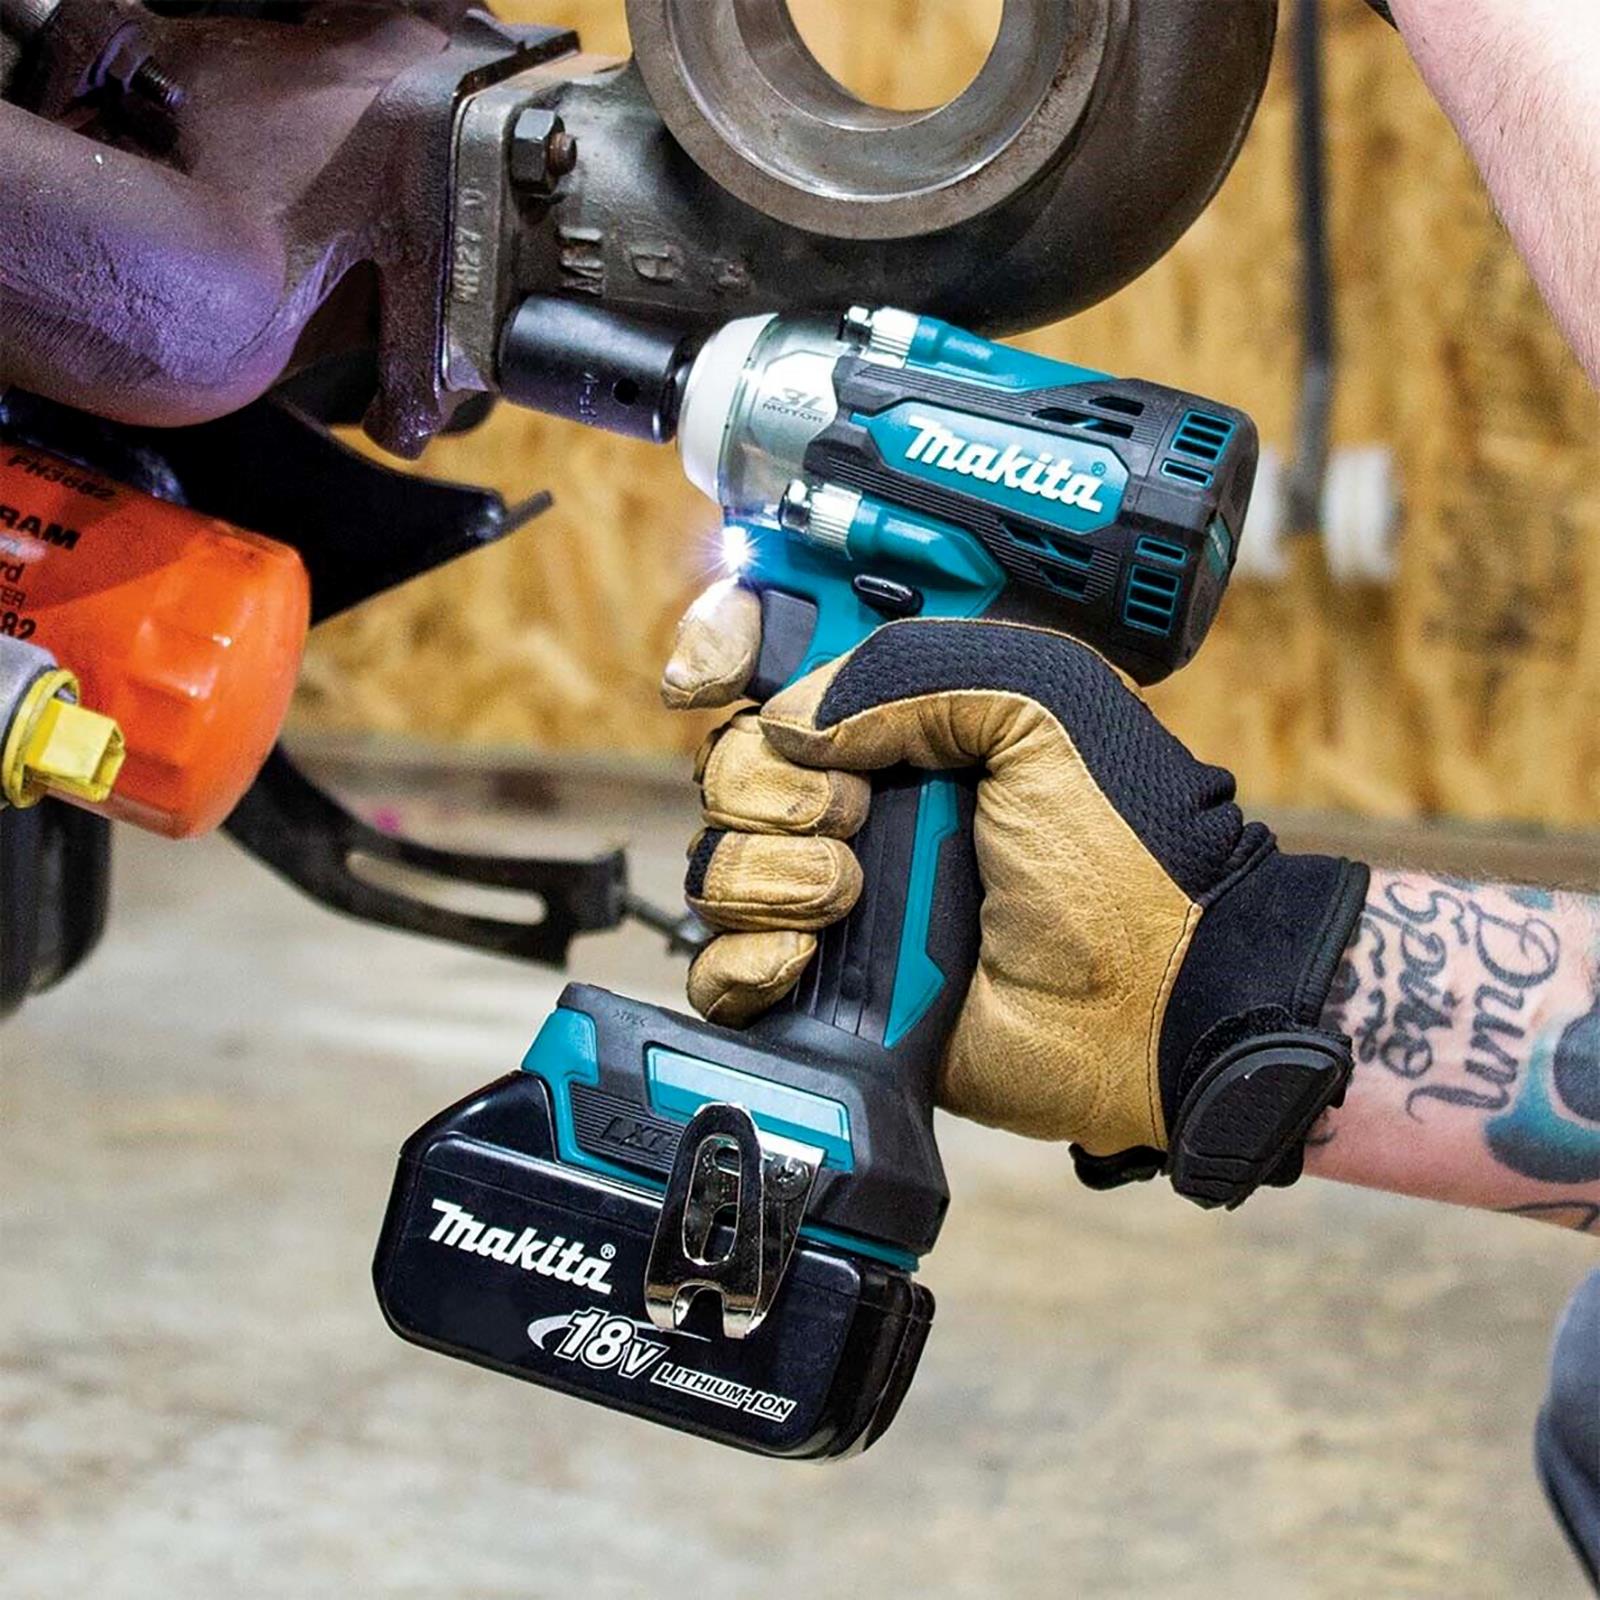 DTW300 Makita 18v Brushless Impact Wrench, 1/2 Drive, c/w 2 x 5Ah